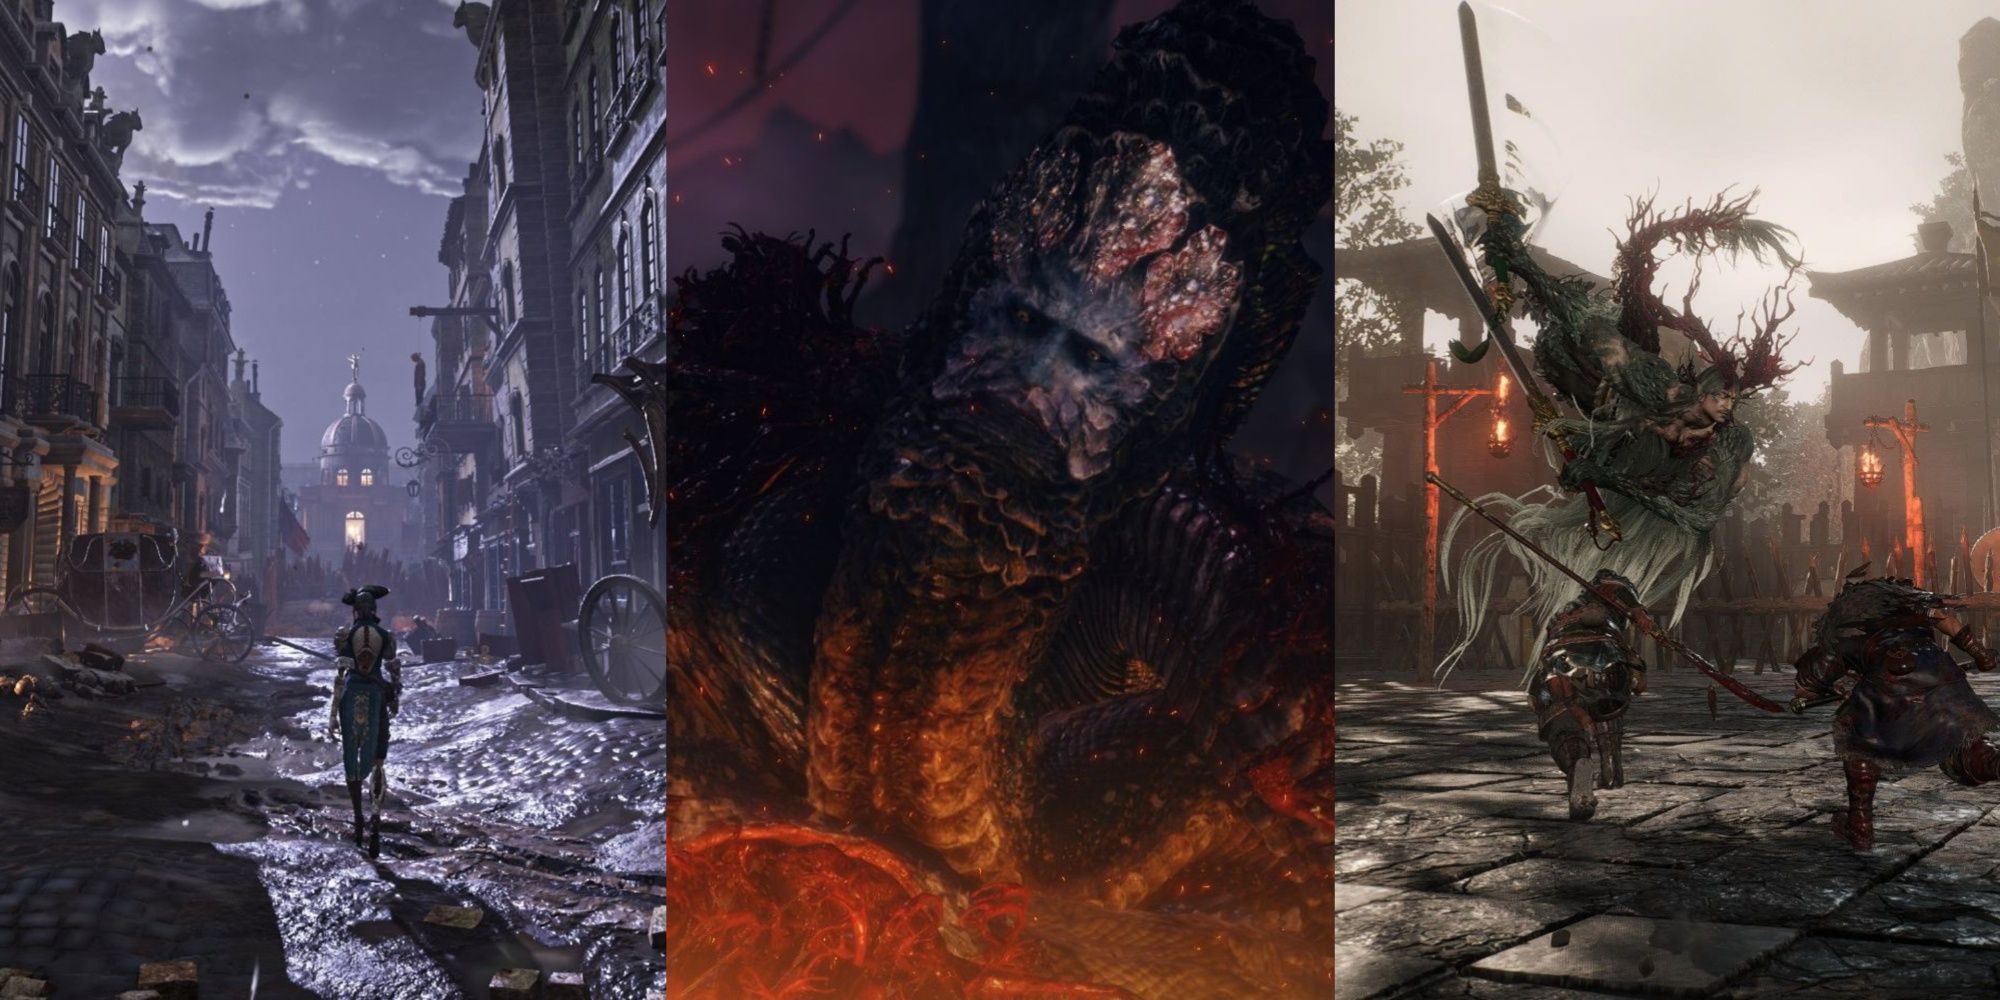 A feature image collage of the gloomy landscape of Steelrising, the Serpent boss from Elden Ring, and characters fighting a giant boss in Wo Long: Fallen Dynasty.